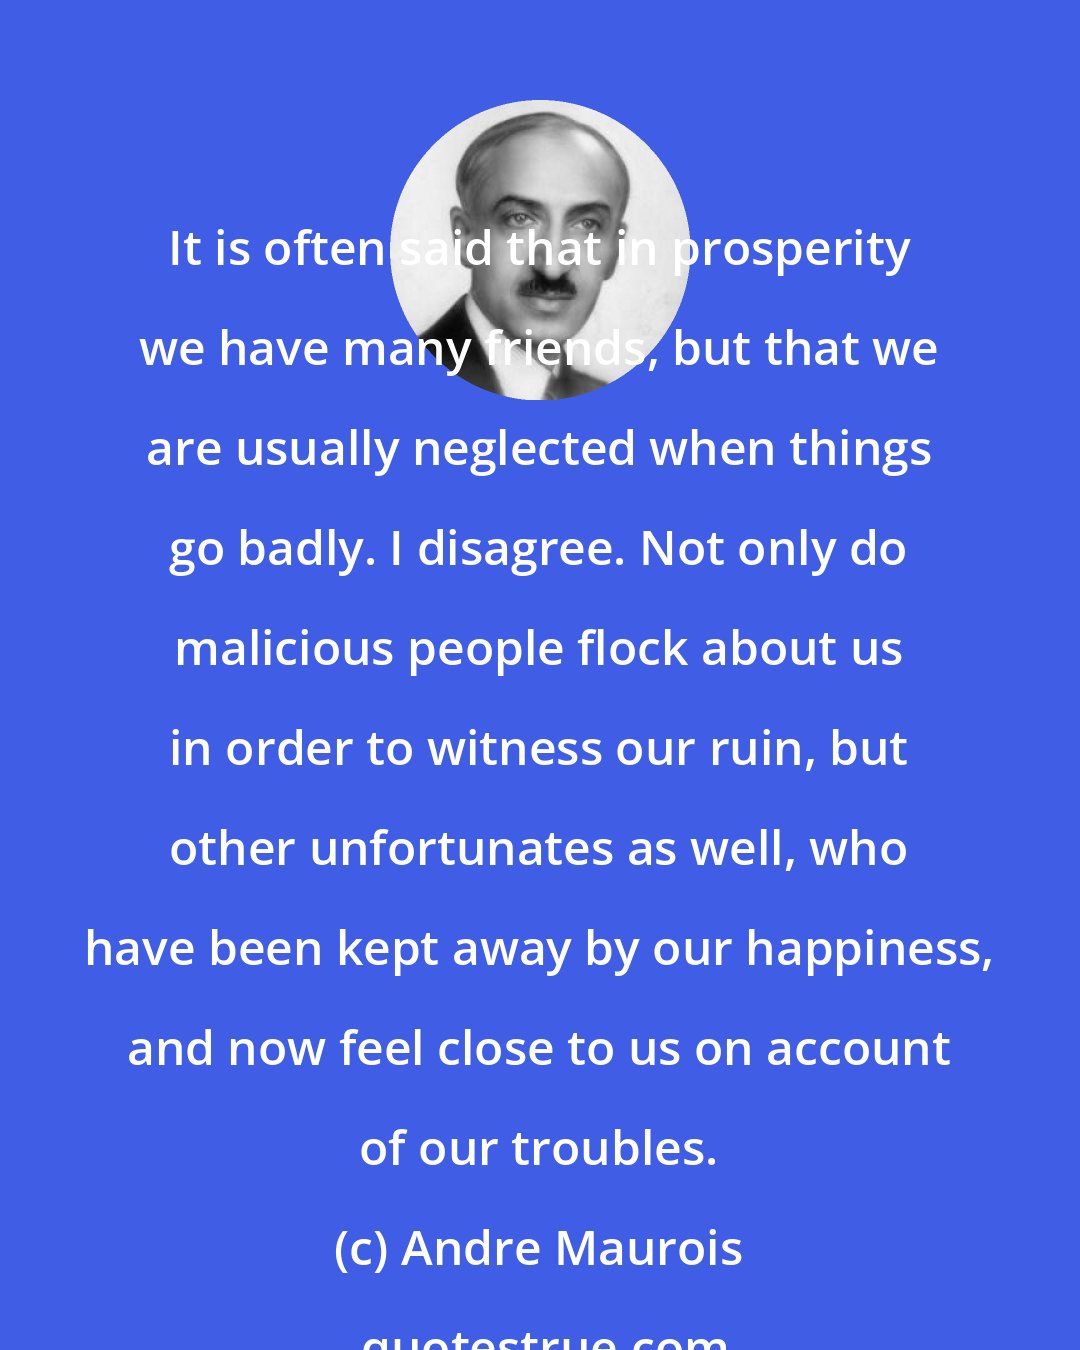 Andre Maurois: It is often said that in prosperity we have many friends, but that we are usually neglected when things go badly. I disagree. Not only do malicious people flock about us in order to witness our ruin, but other unfortunates as well, who have been kept away by our happiness, and now feel close to us on account of our troubles.